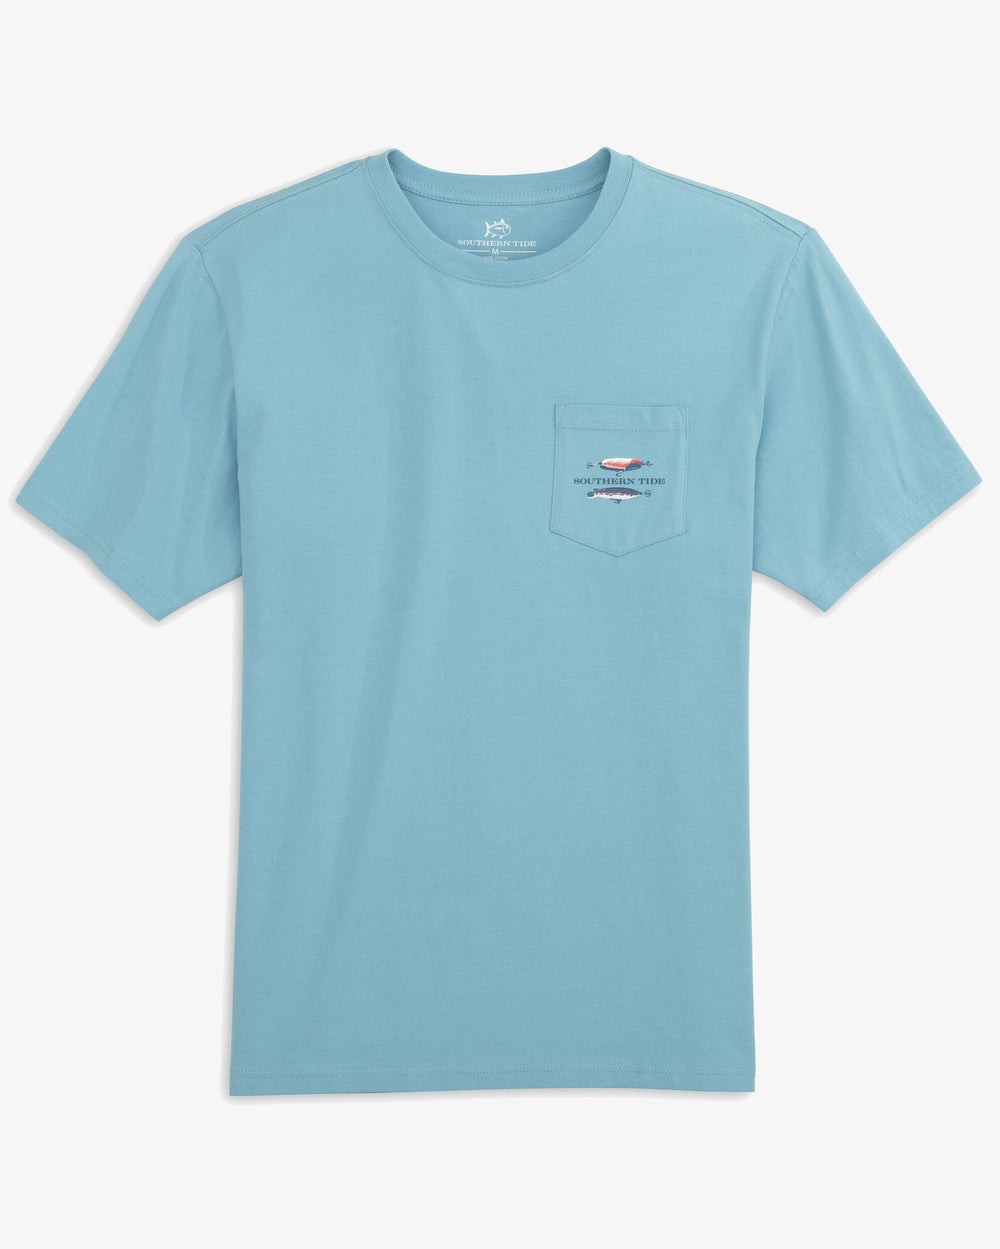 The front view of the Men's Bobbers and Lures Tide T-Shirt by Southern Tide - Brisk Blue